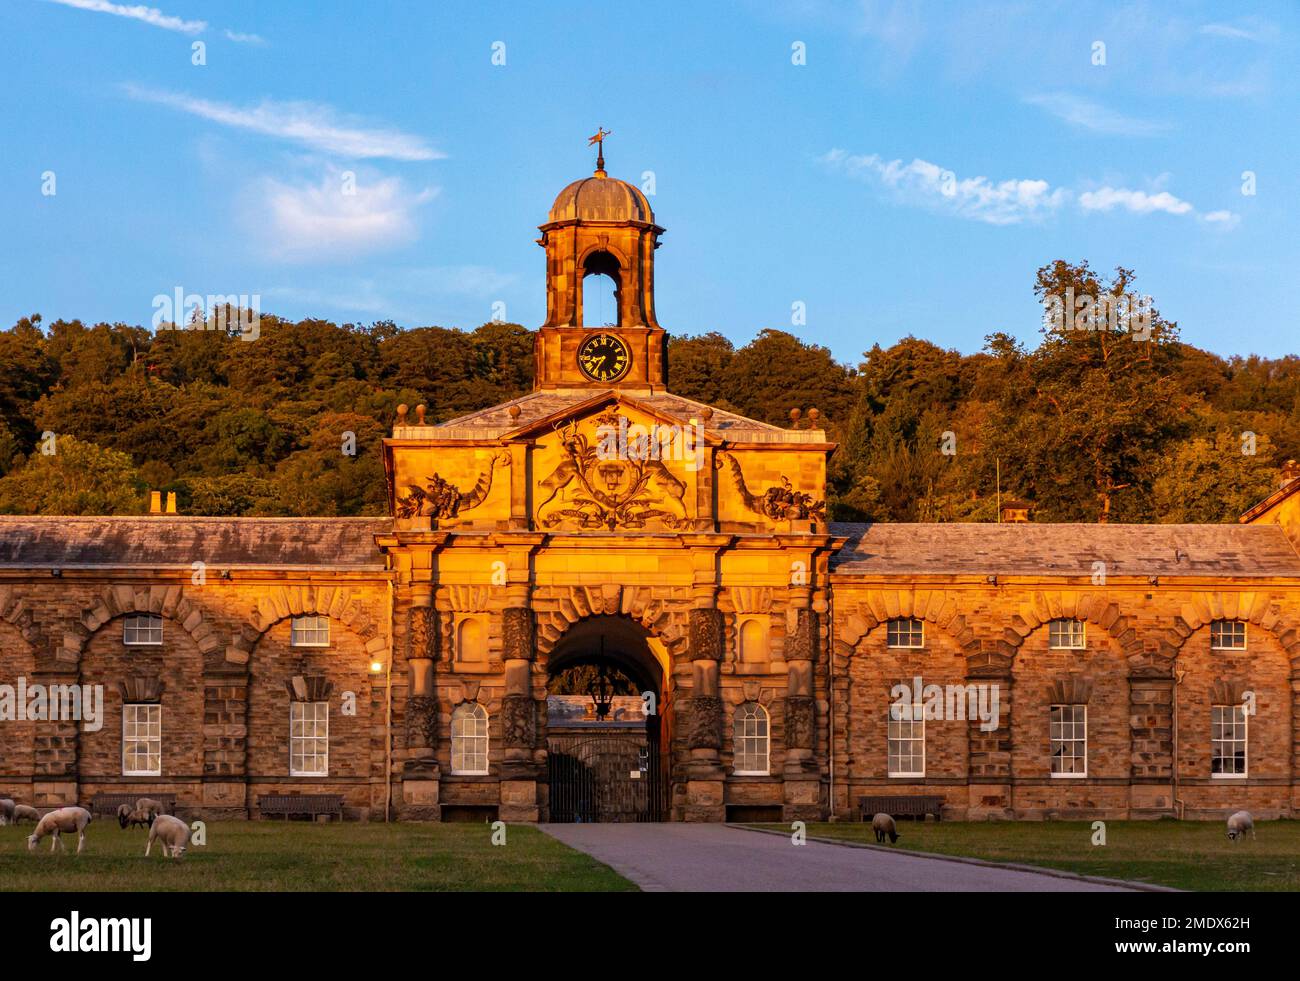 The Stable Block at Chatsworth in Derbyshire England UK built 1758-1763 by James Paine for the fourth Duke of Devonshire with Stand Wood in background Stock Photo